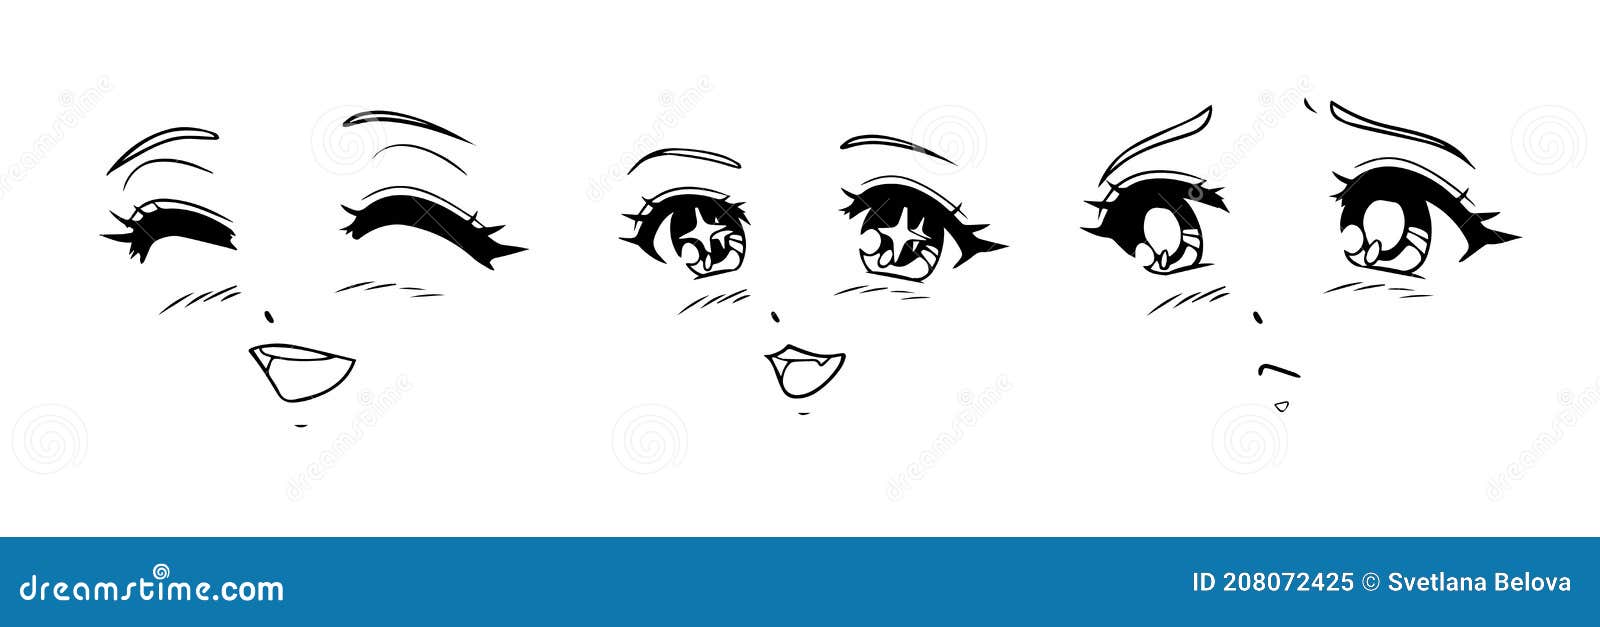 Anime and Manga Faces Set. Different Expressions Stock Vector ...